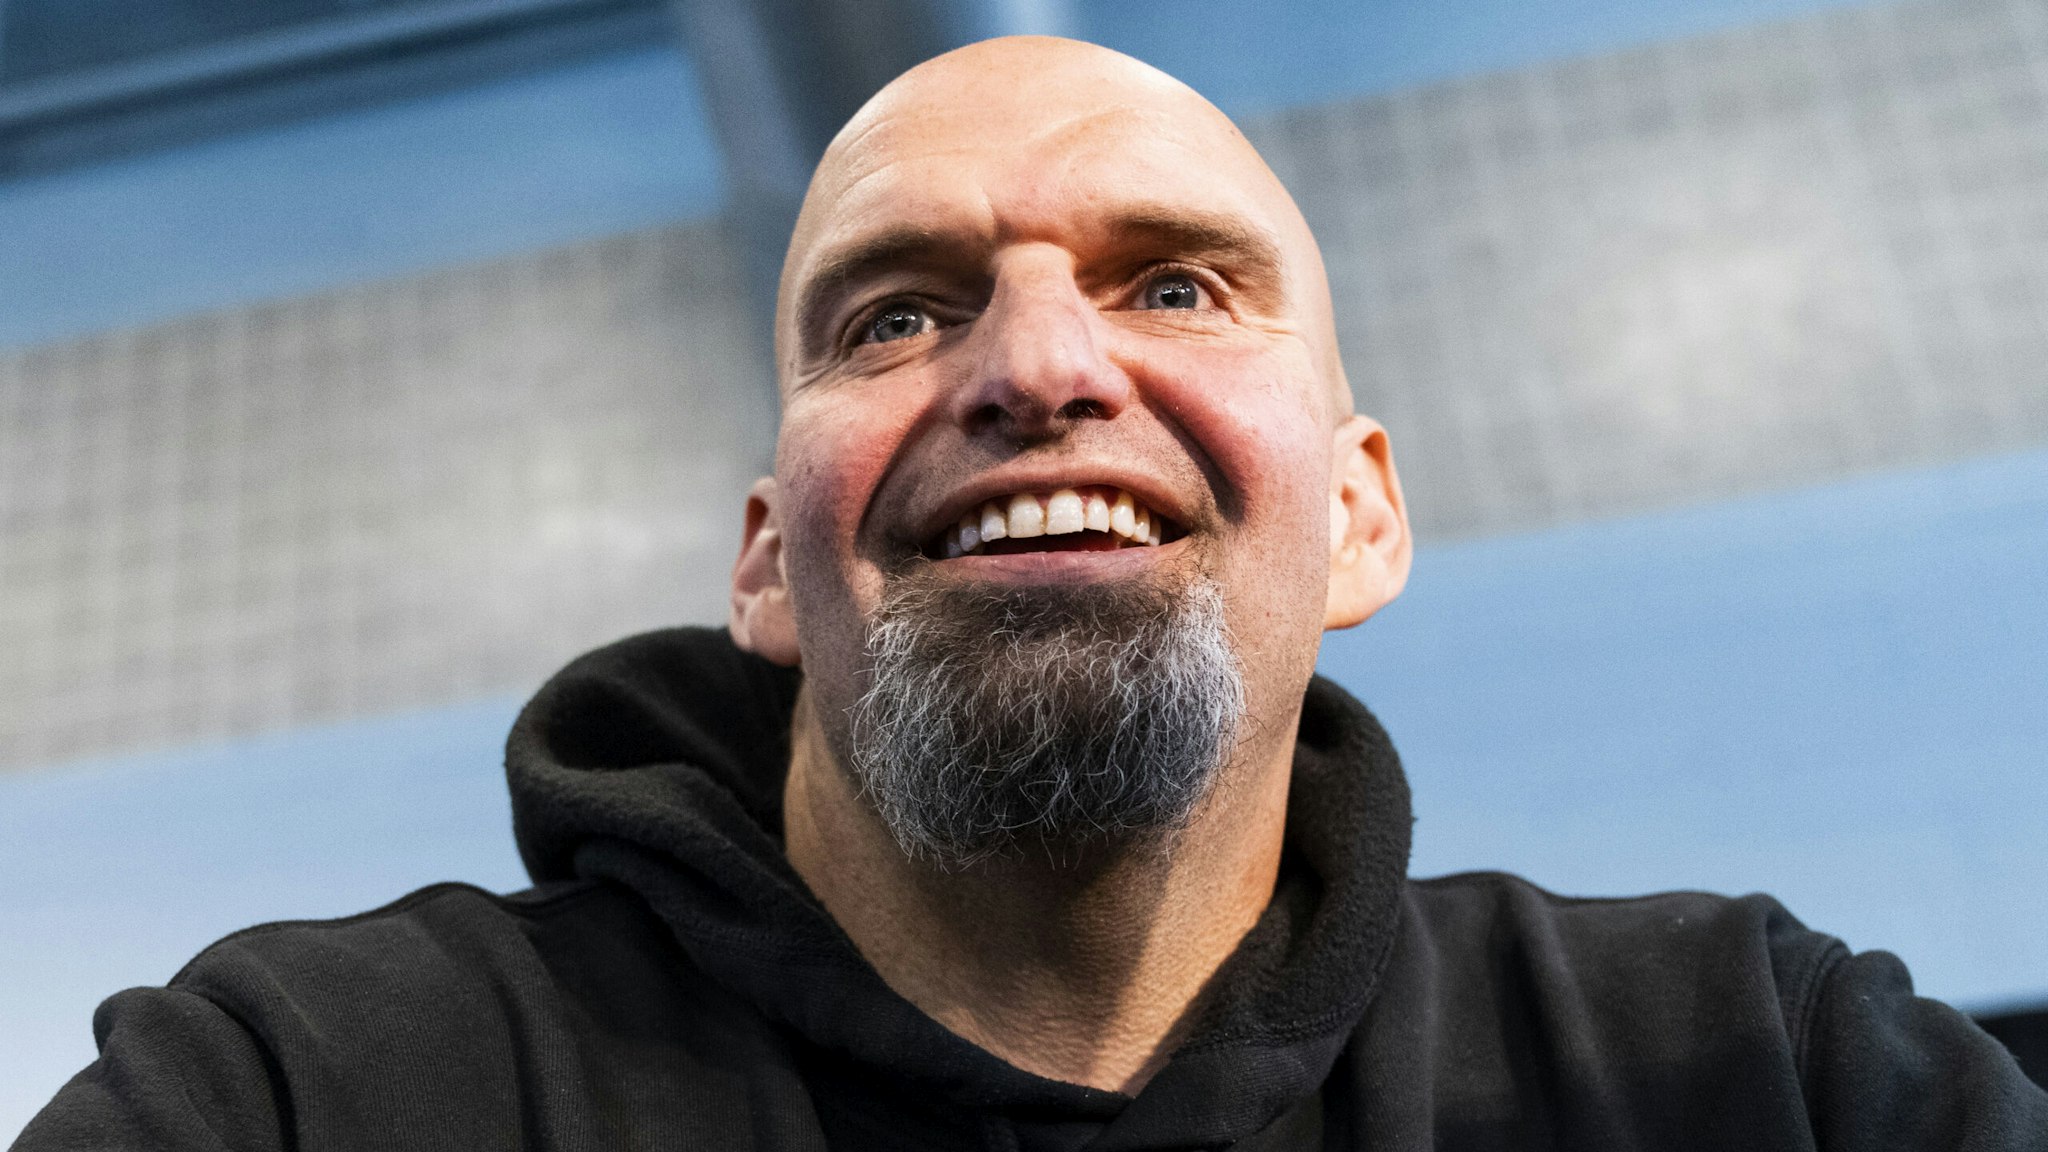 UNITED STATES - SEPTEMBER 24: Democratic candidate for U.S. Senate Lt. Gov. John Fetterman, D-Pa., greets supporters during a campaign rally at the Dorothy Emanuel Recreation Center in Philadelphia Pa., on Saturday, September 24, 2022.